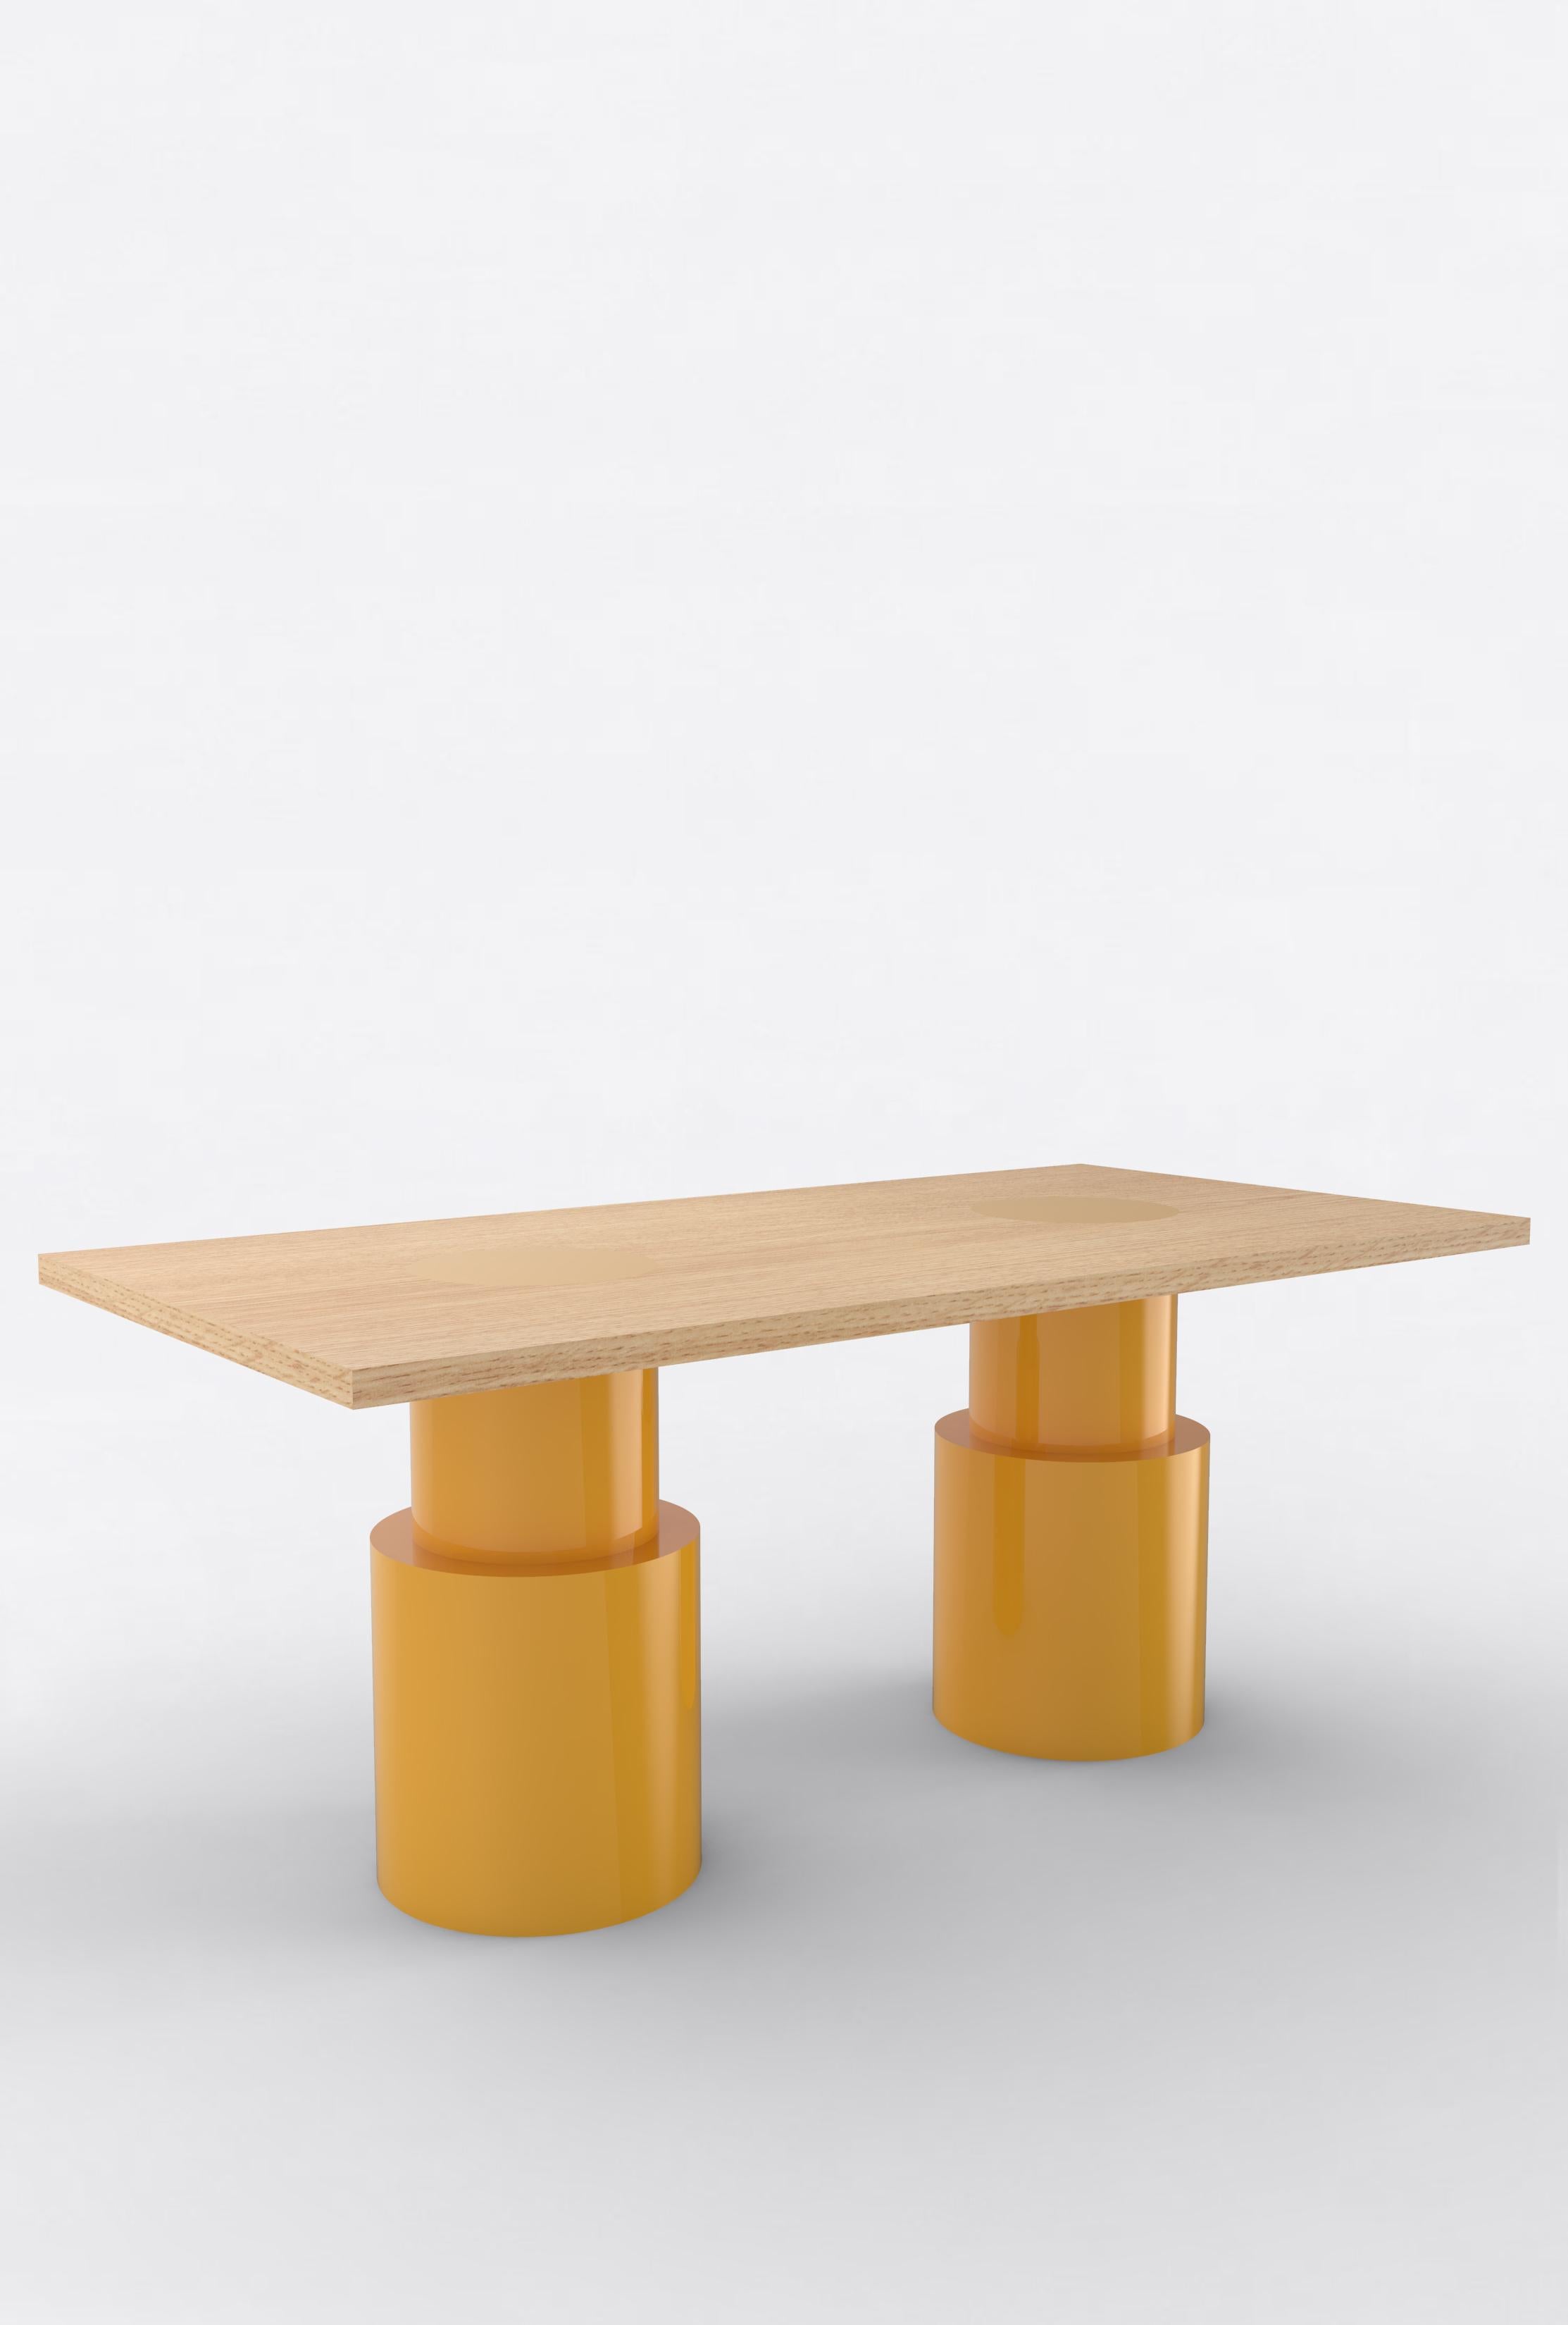 Contemporary 102C Dining Table in Oak and Color by Orphan Work, 2020 In New Condition For Sale In Los Angeles, CA